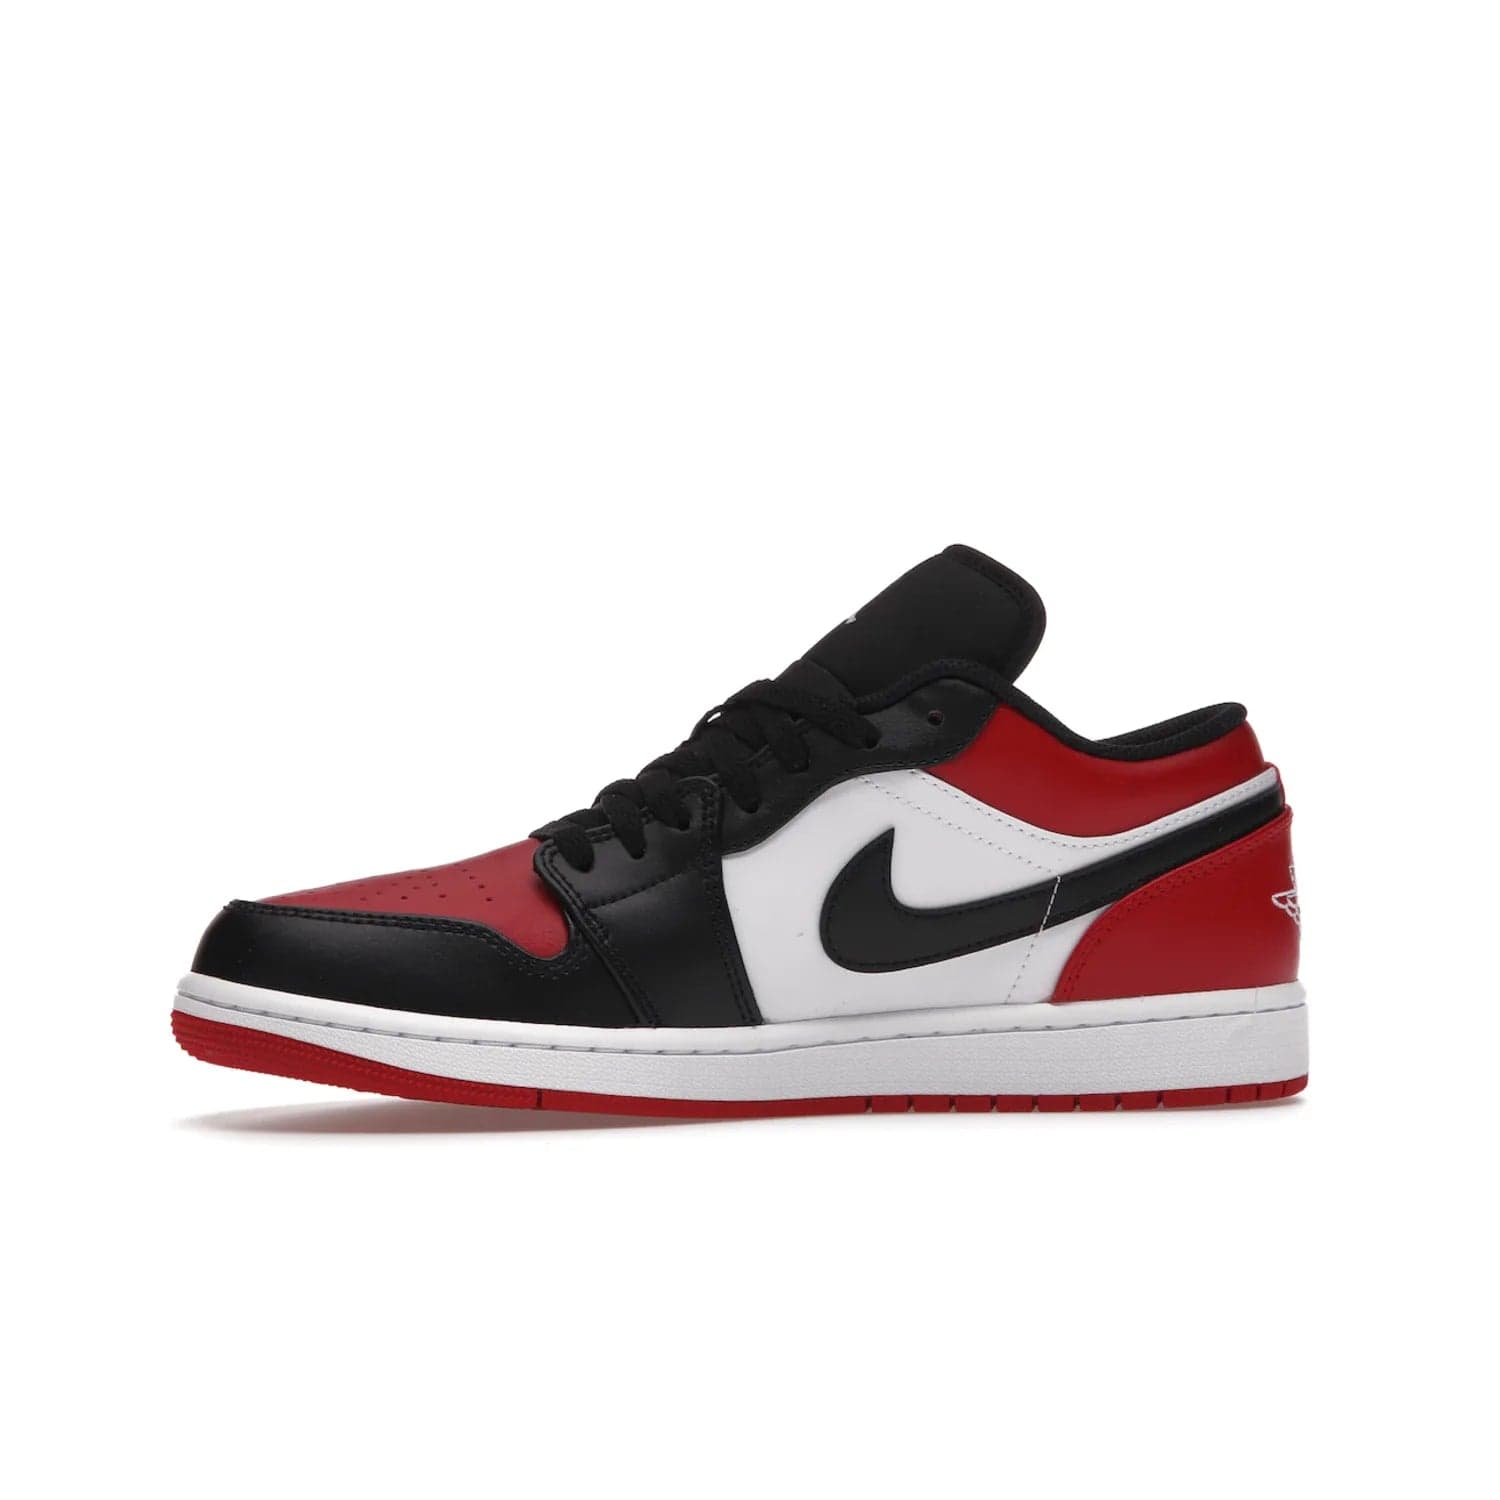 Jordan 1 Low Bred Toe - Image 18 - Only at www.BallersClubKickz.com - Step into the iconic Jordan 1 Retro. Mixing and matching of leather in red, black, and white makes for a unique colorway. Finished off with a Wing logo embroidery & Jumpman label. Comfortable and stylish at an affordable $100, the Jordan 1 Low Bred Toe is perfect for any true sneaker fan.